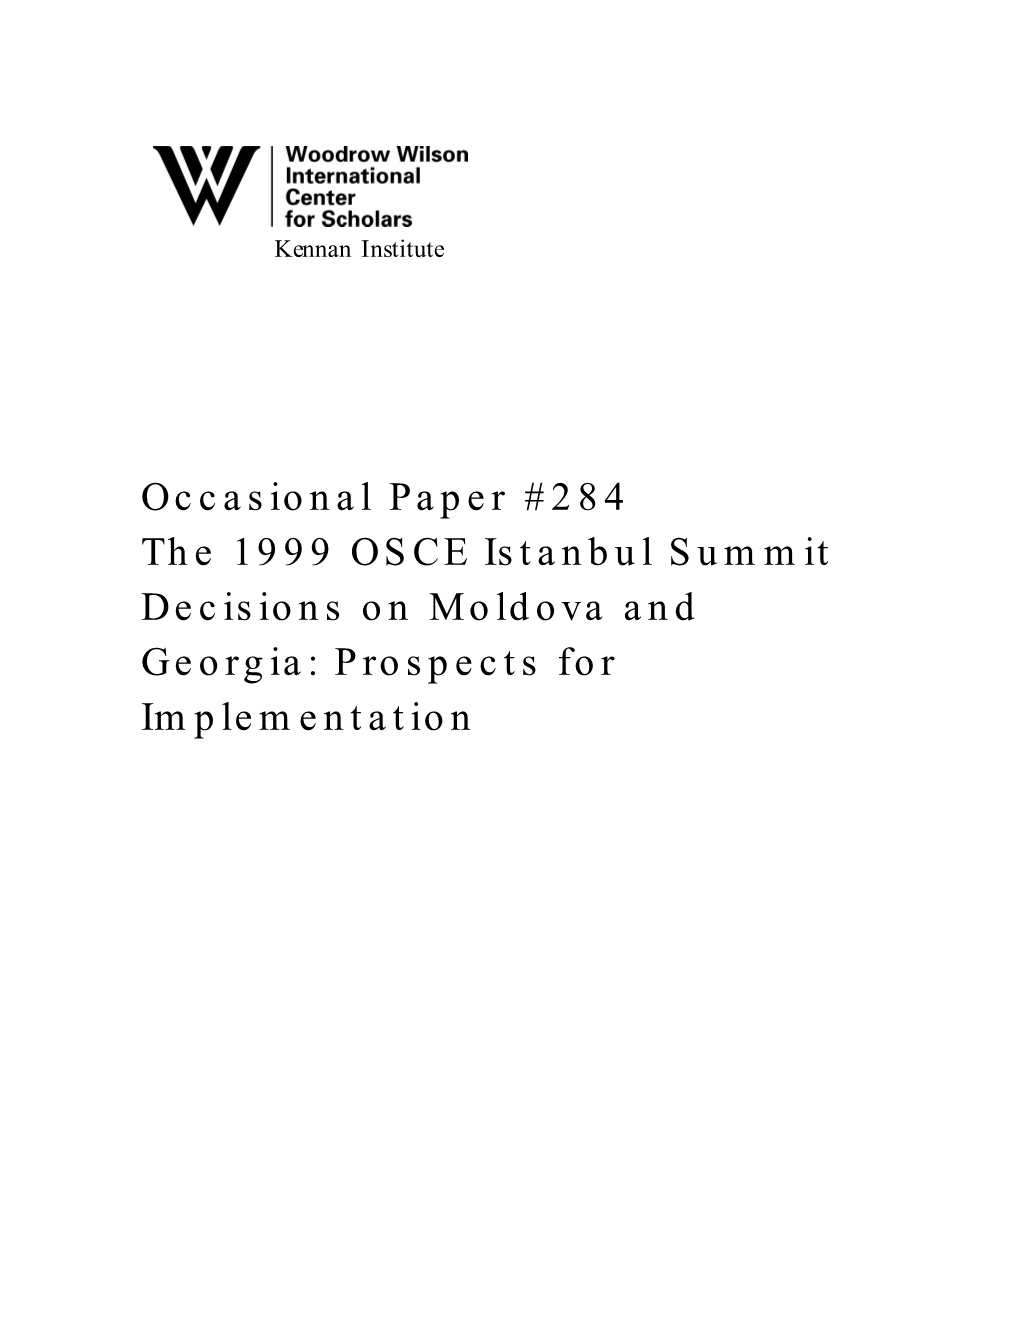 Occasional Paper #284 the 1999 OSCE Istanbul Summit Decisions on Moldova and Georgia: Prospects for Implementation